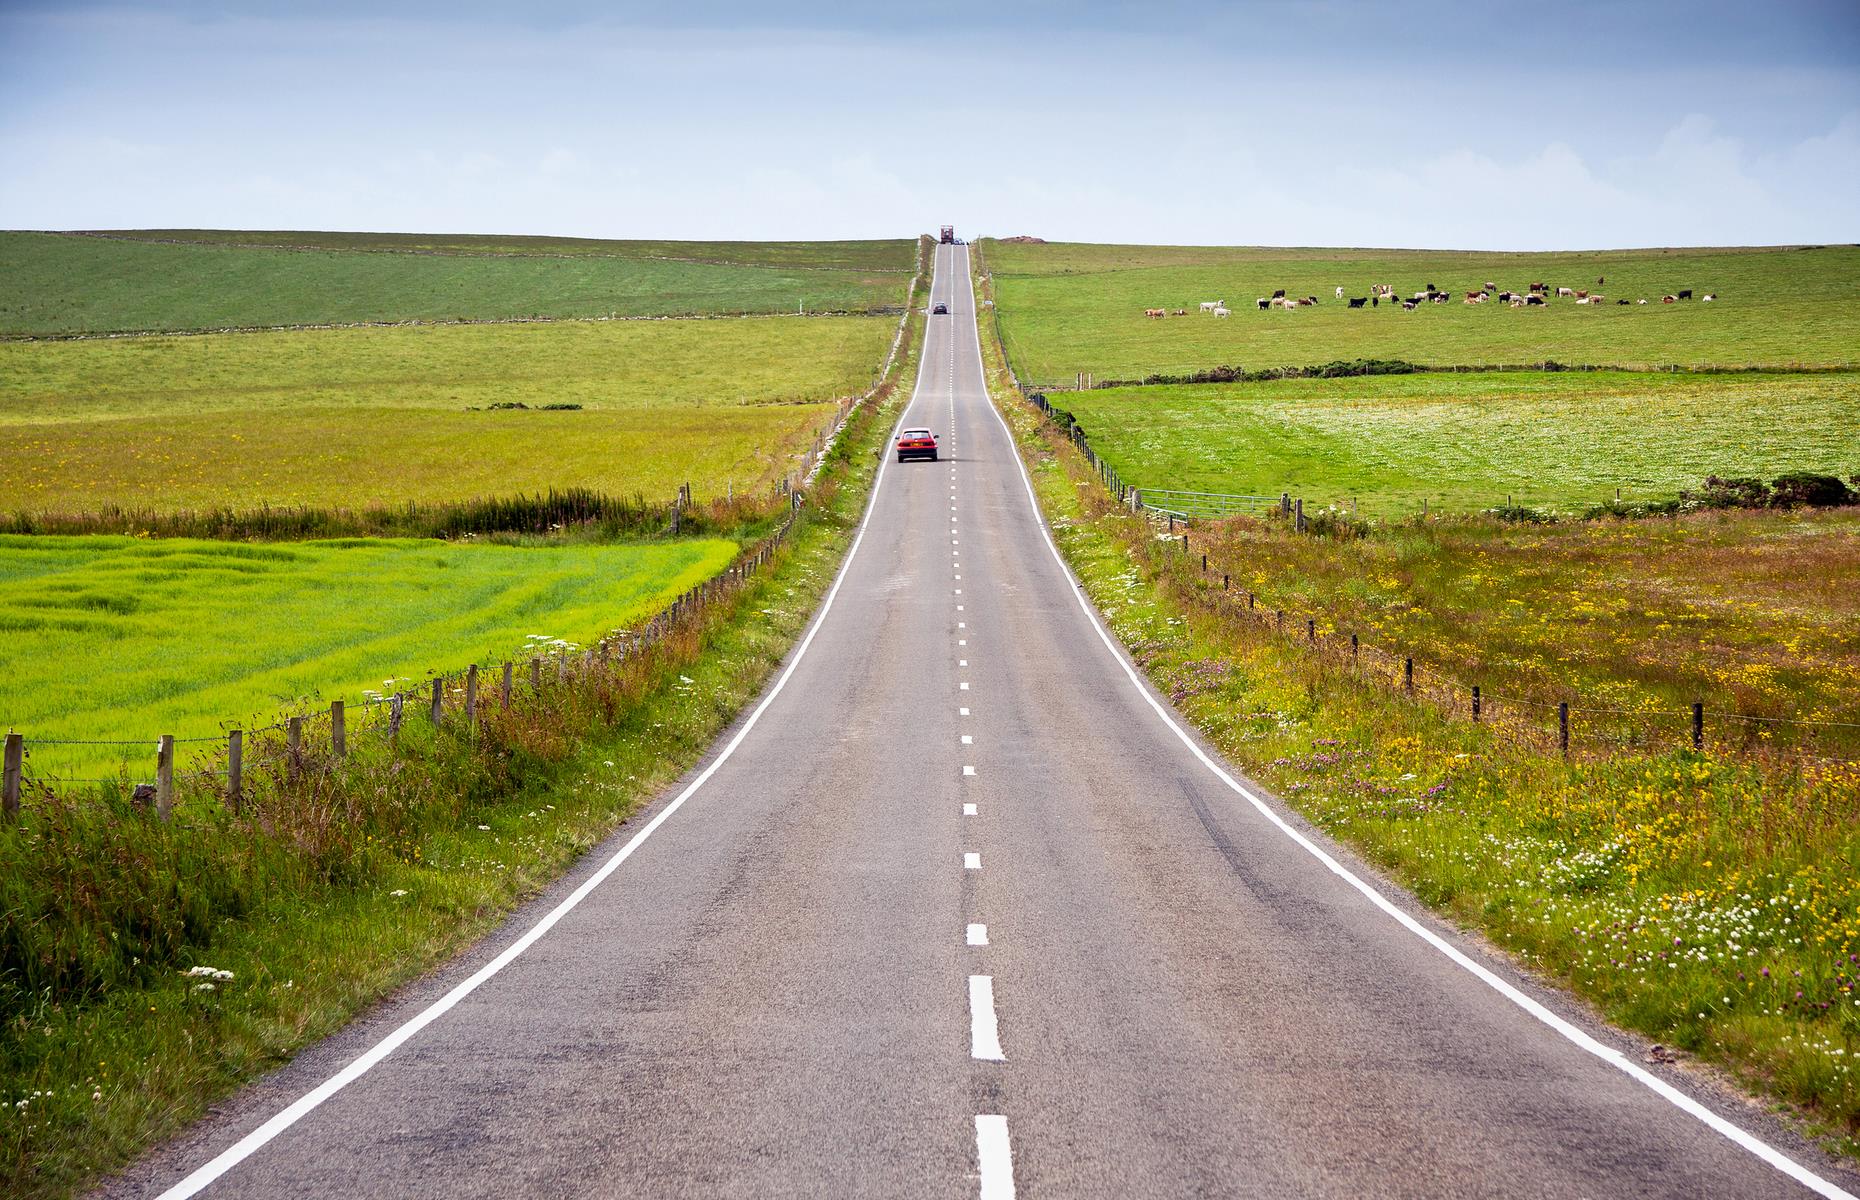 <p>Britain is one of a handful of countries that drive on the left (Australia, Malta, and Japan are others, in case you wondered). This can make for a trying drive if you’re used to riding on the right but Britain’s beautiful back roads and country lanes are worth the white knuckles so buckle up and keep your wits about you.</p>